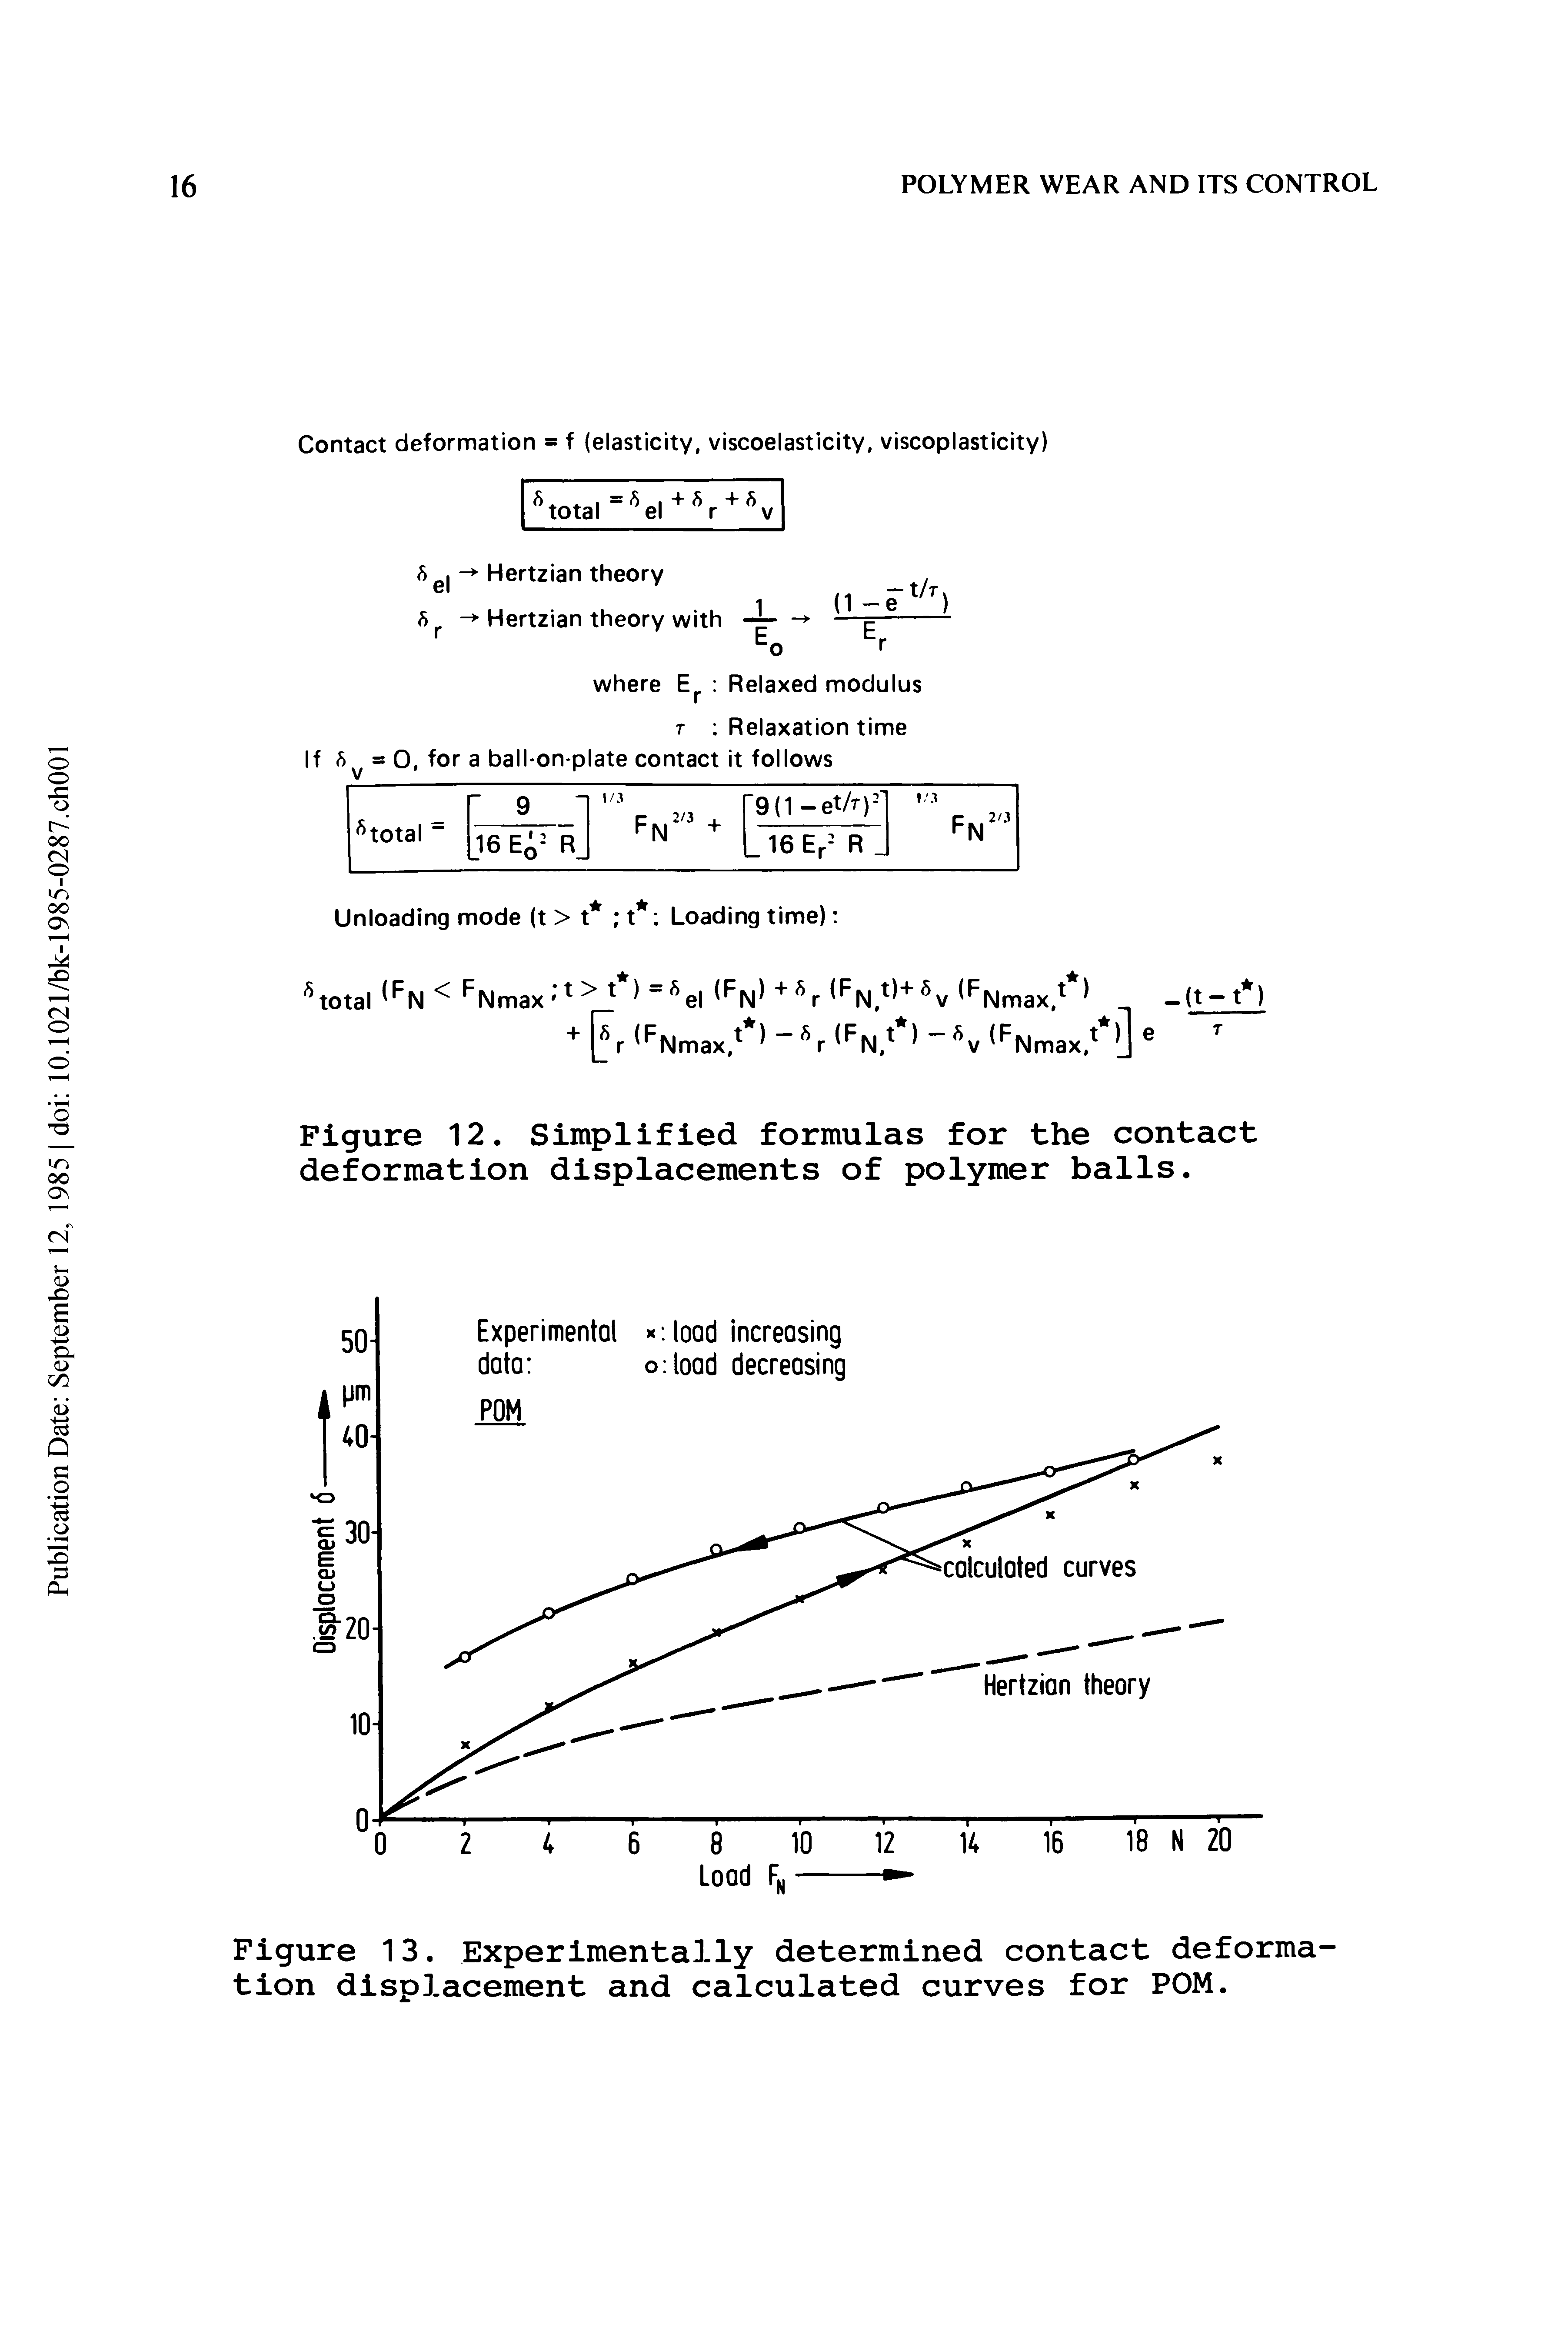 Figure 12. Simplified formulas for the contact deformation displacements of polymer balls.